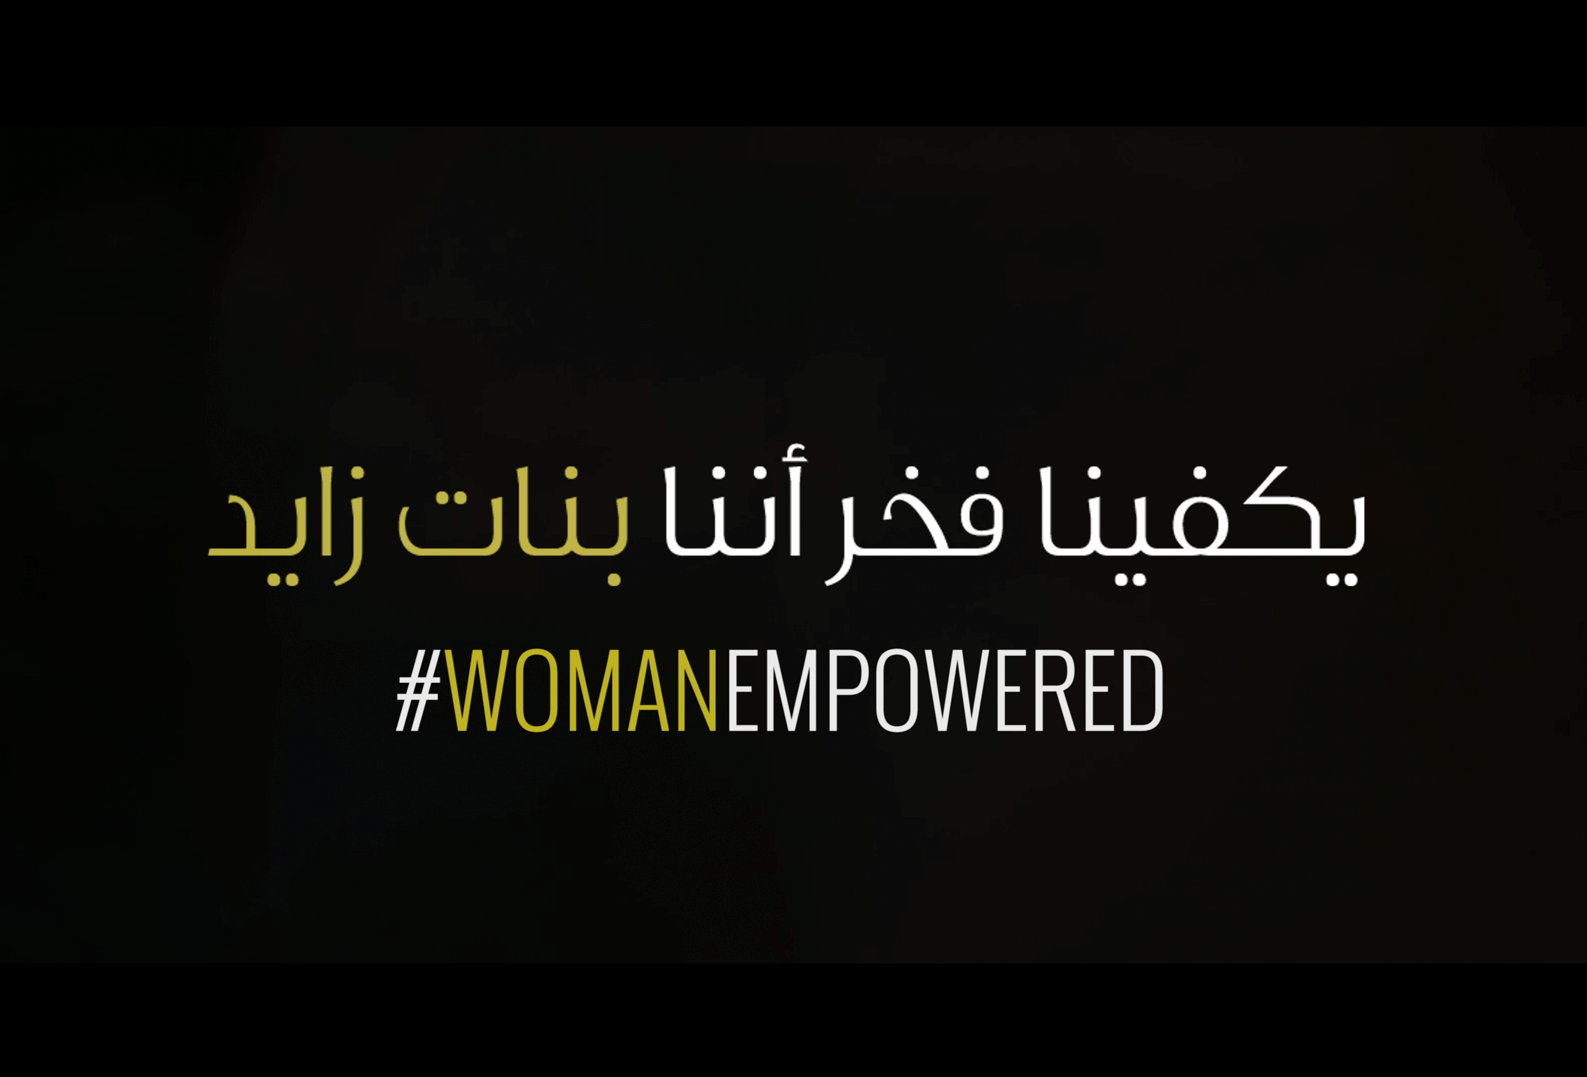 WOMAN EMPOWERED